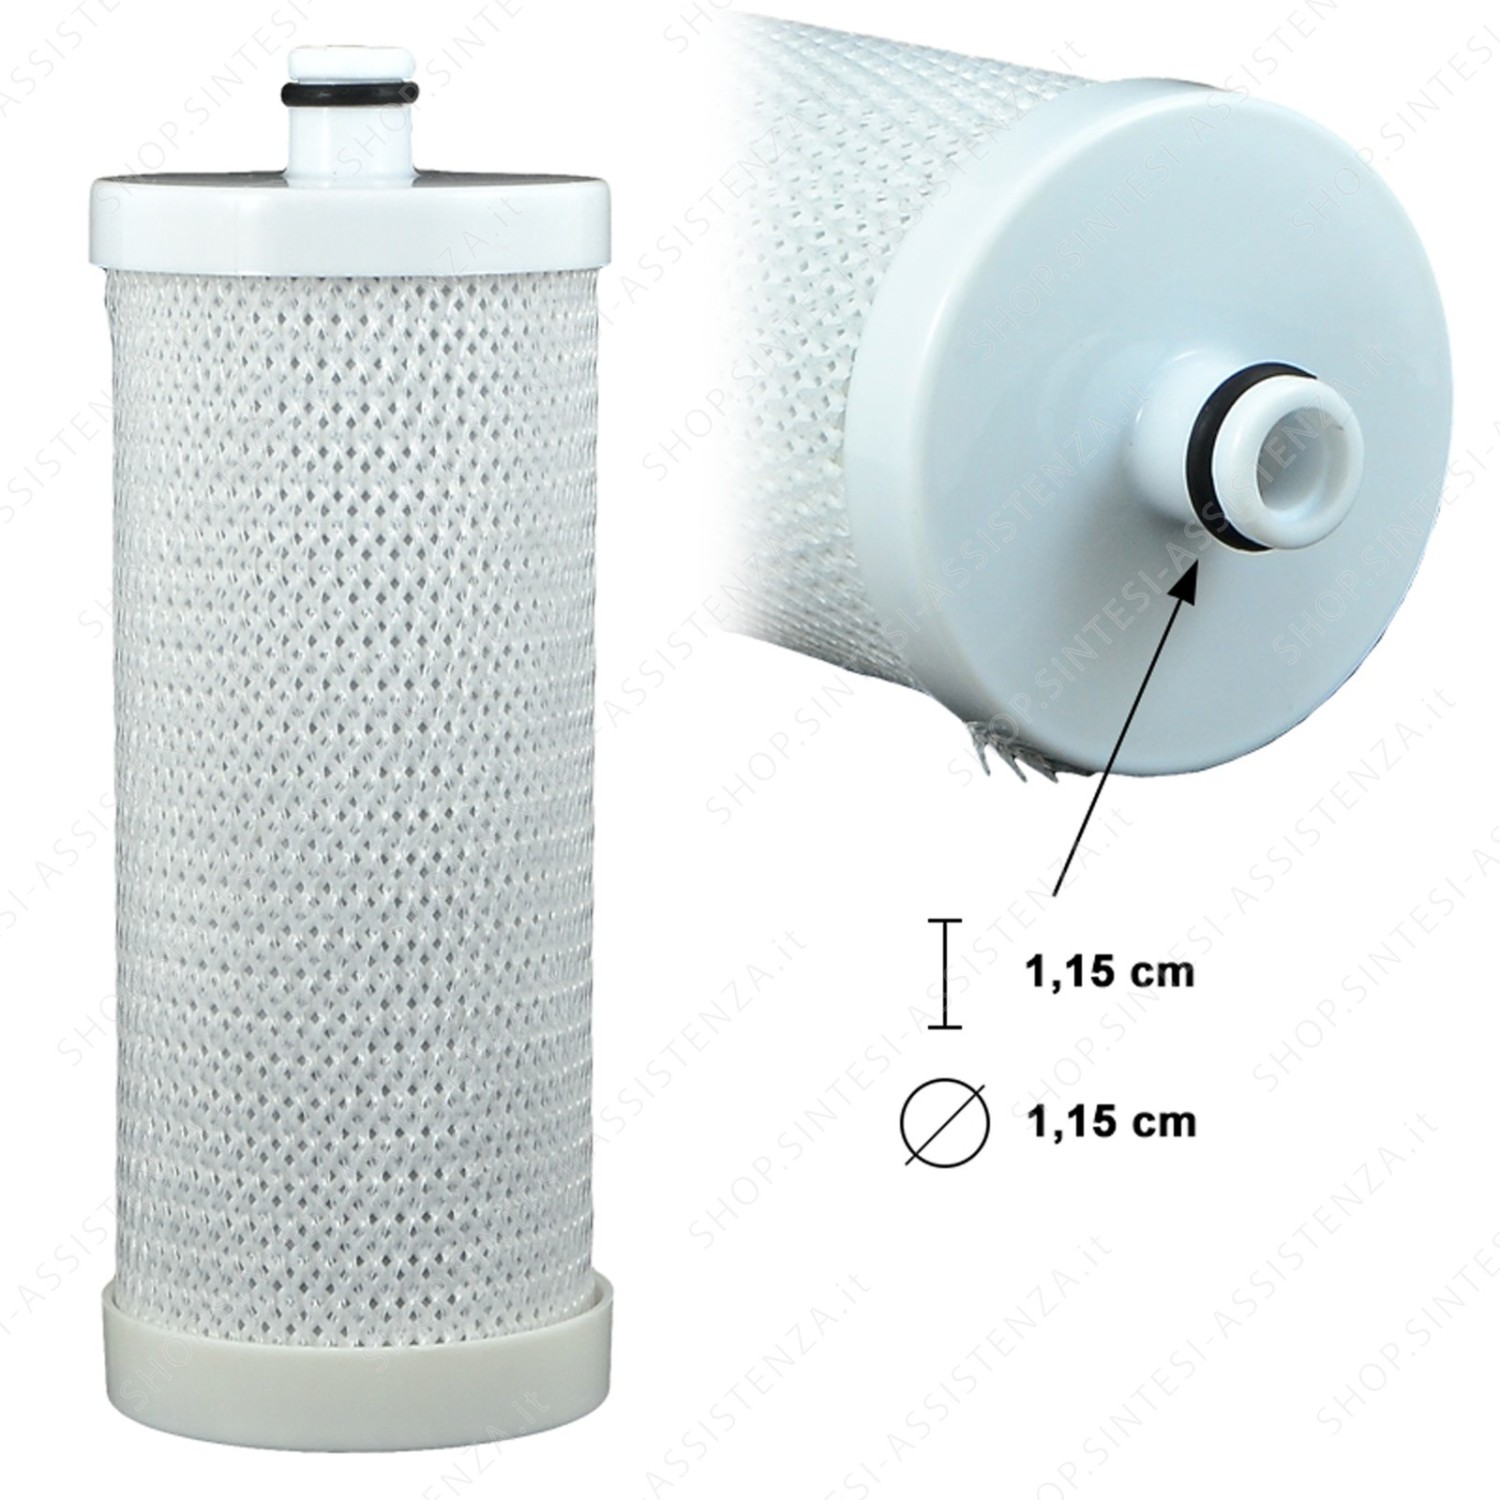 WATER FILTER FOR FRIDGE ADAPTABLE HOOVER CANDY ELCTROLUX 09183849 WF030 - WF030